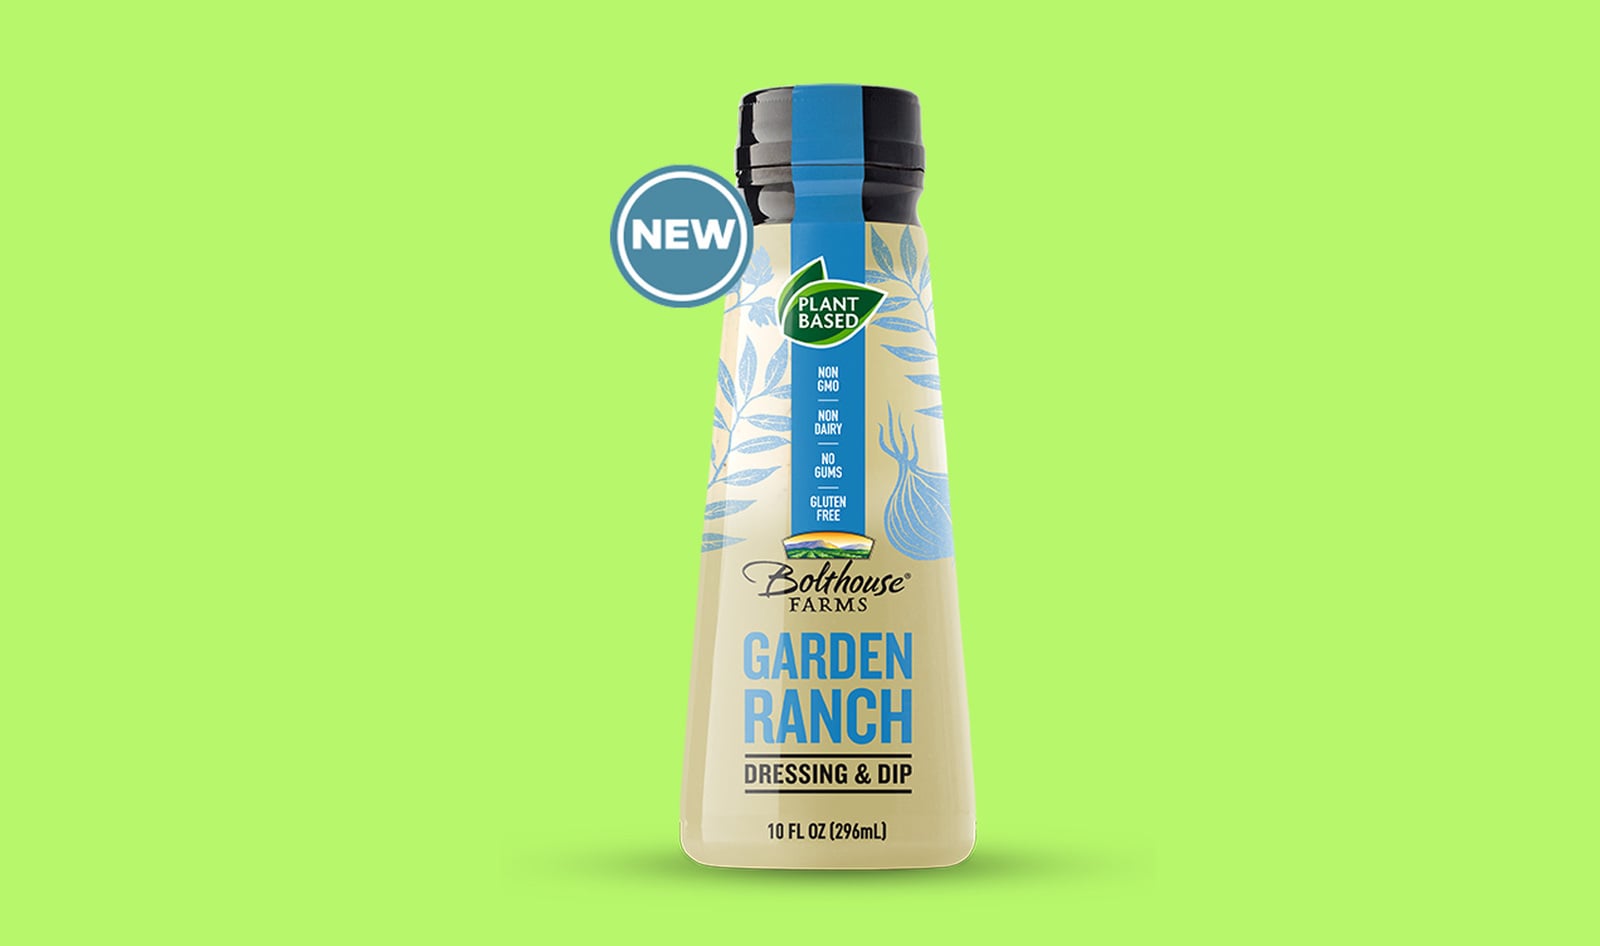 New Vegan Ranch Dressing Made From Oats Coming to Stores This Fall